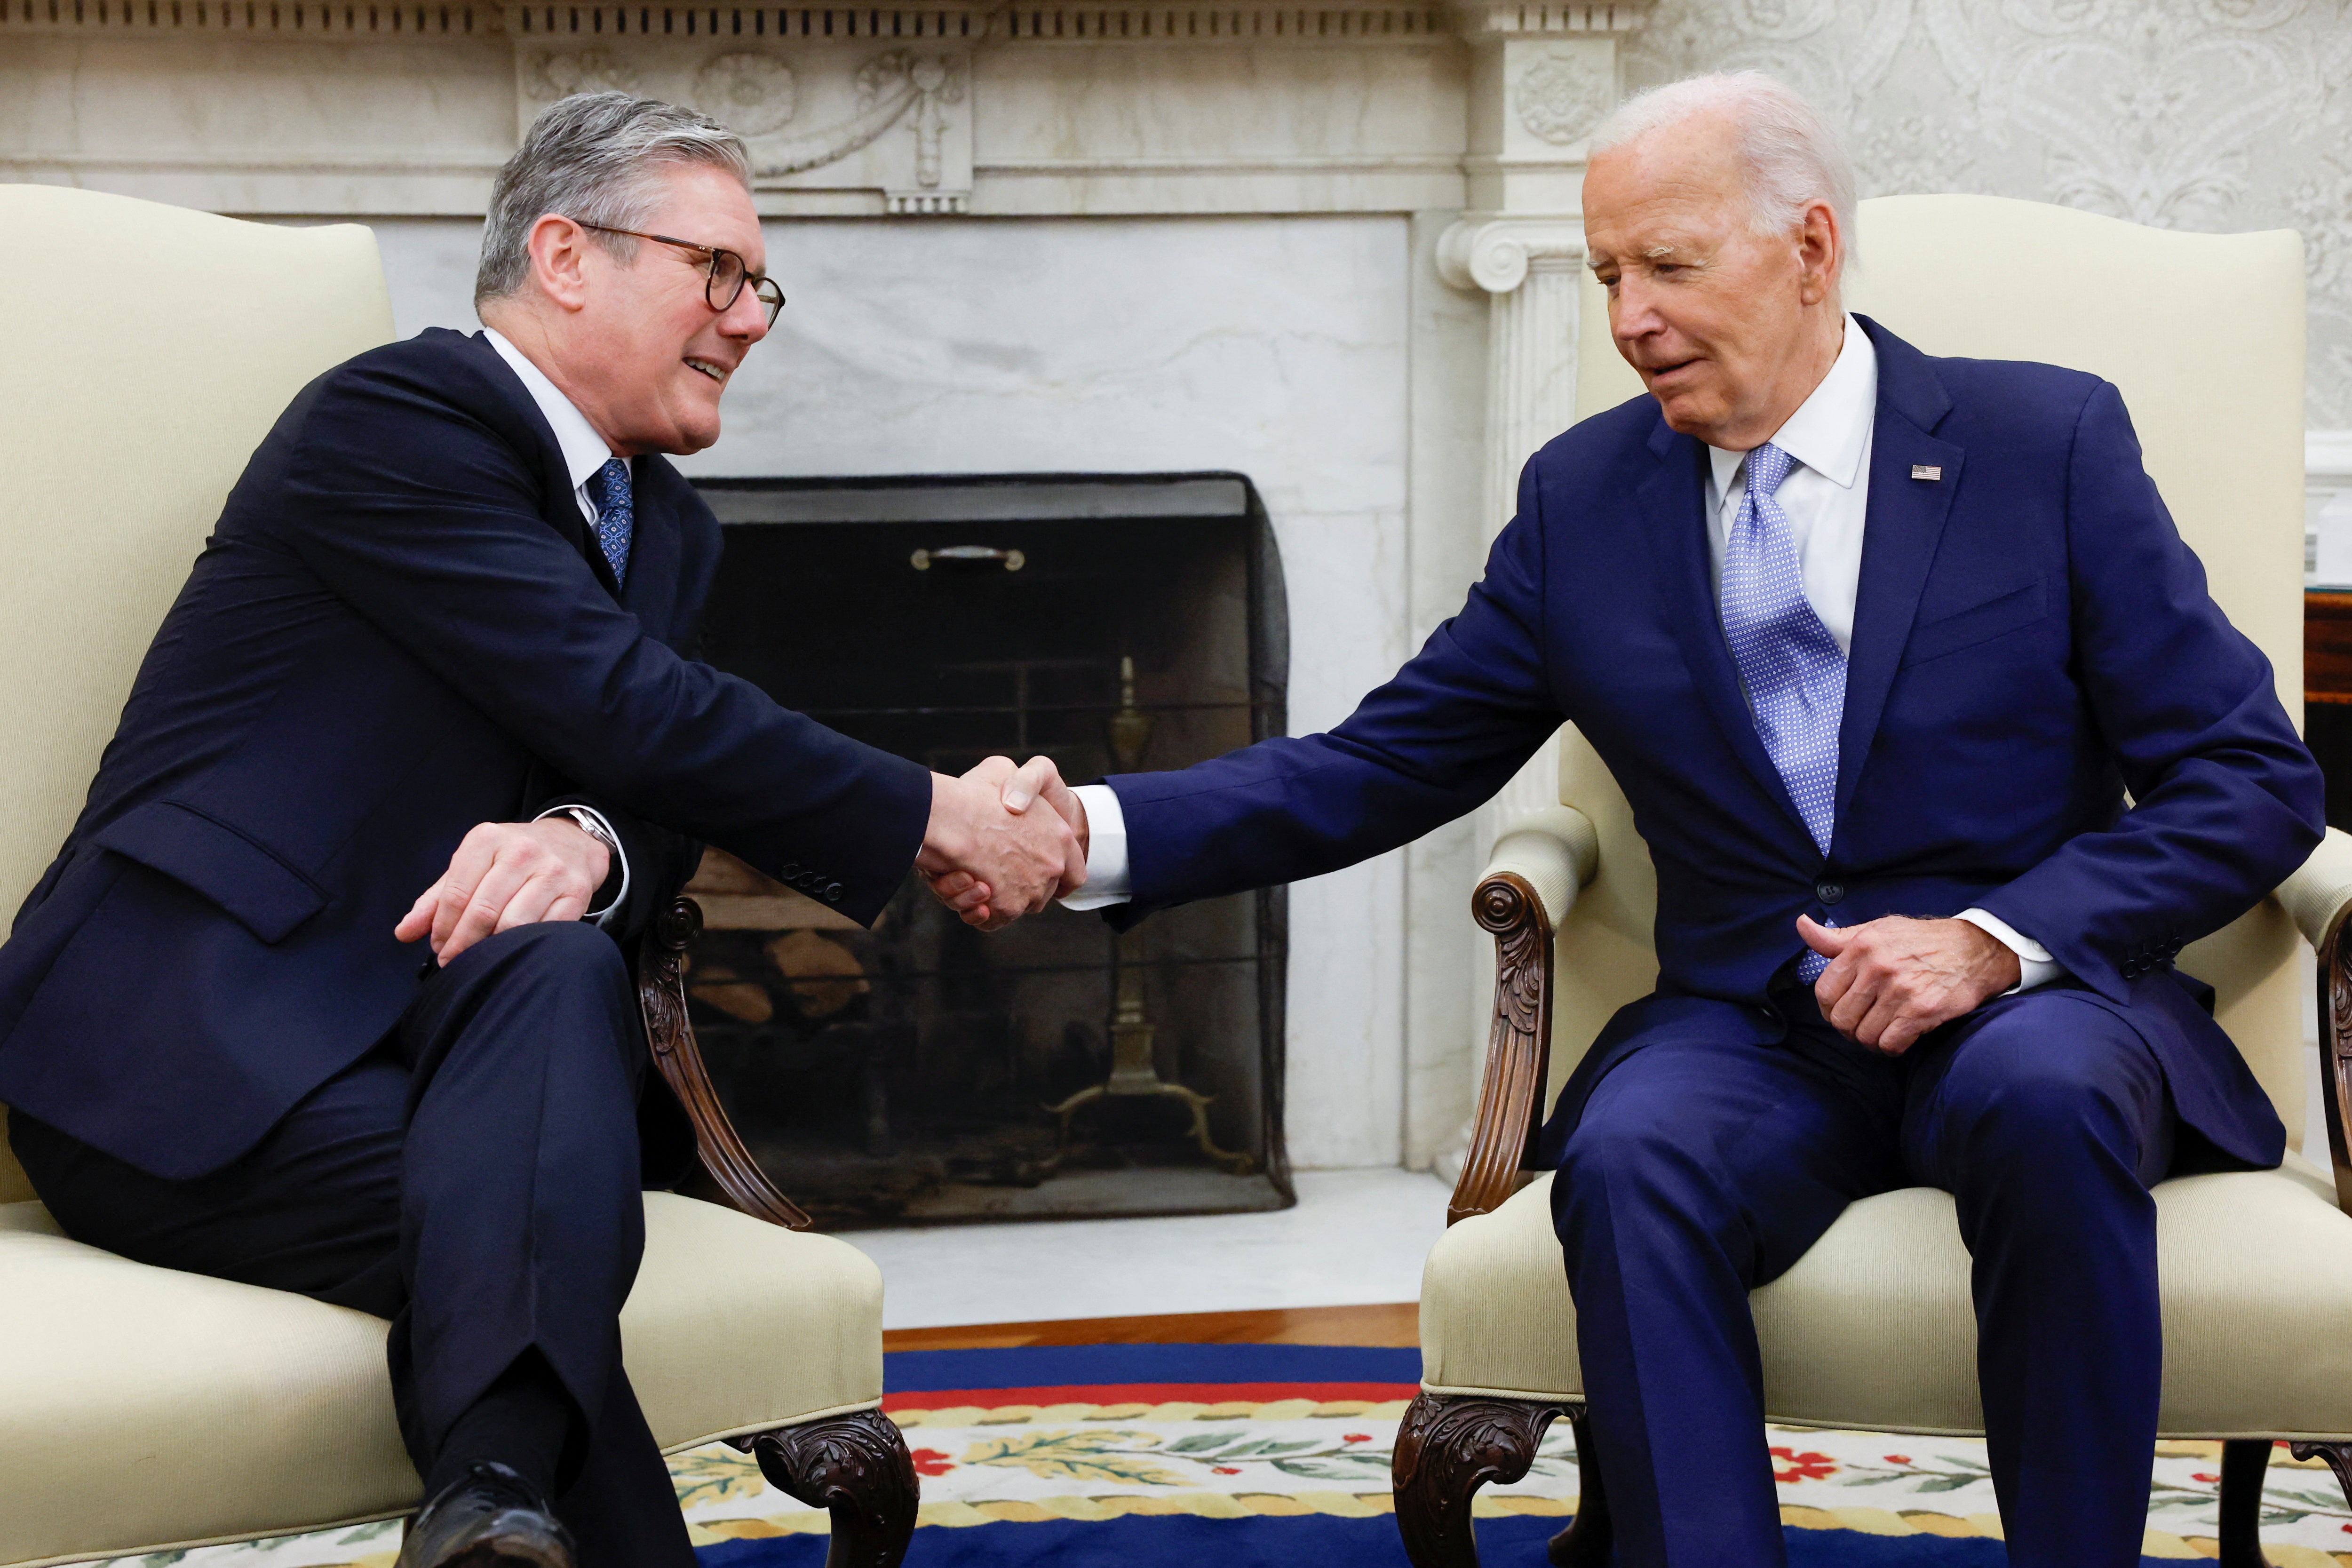 Biden and Starmer shake hands in the Oval Office